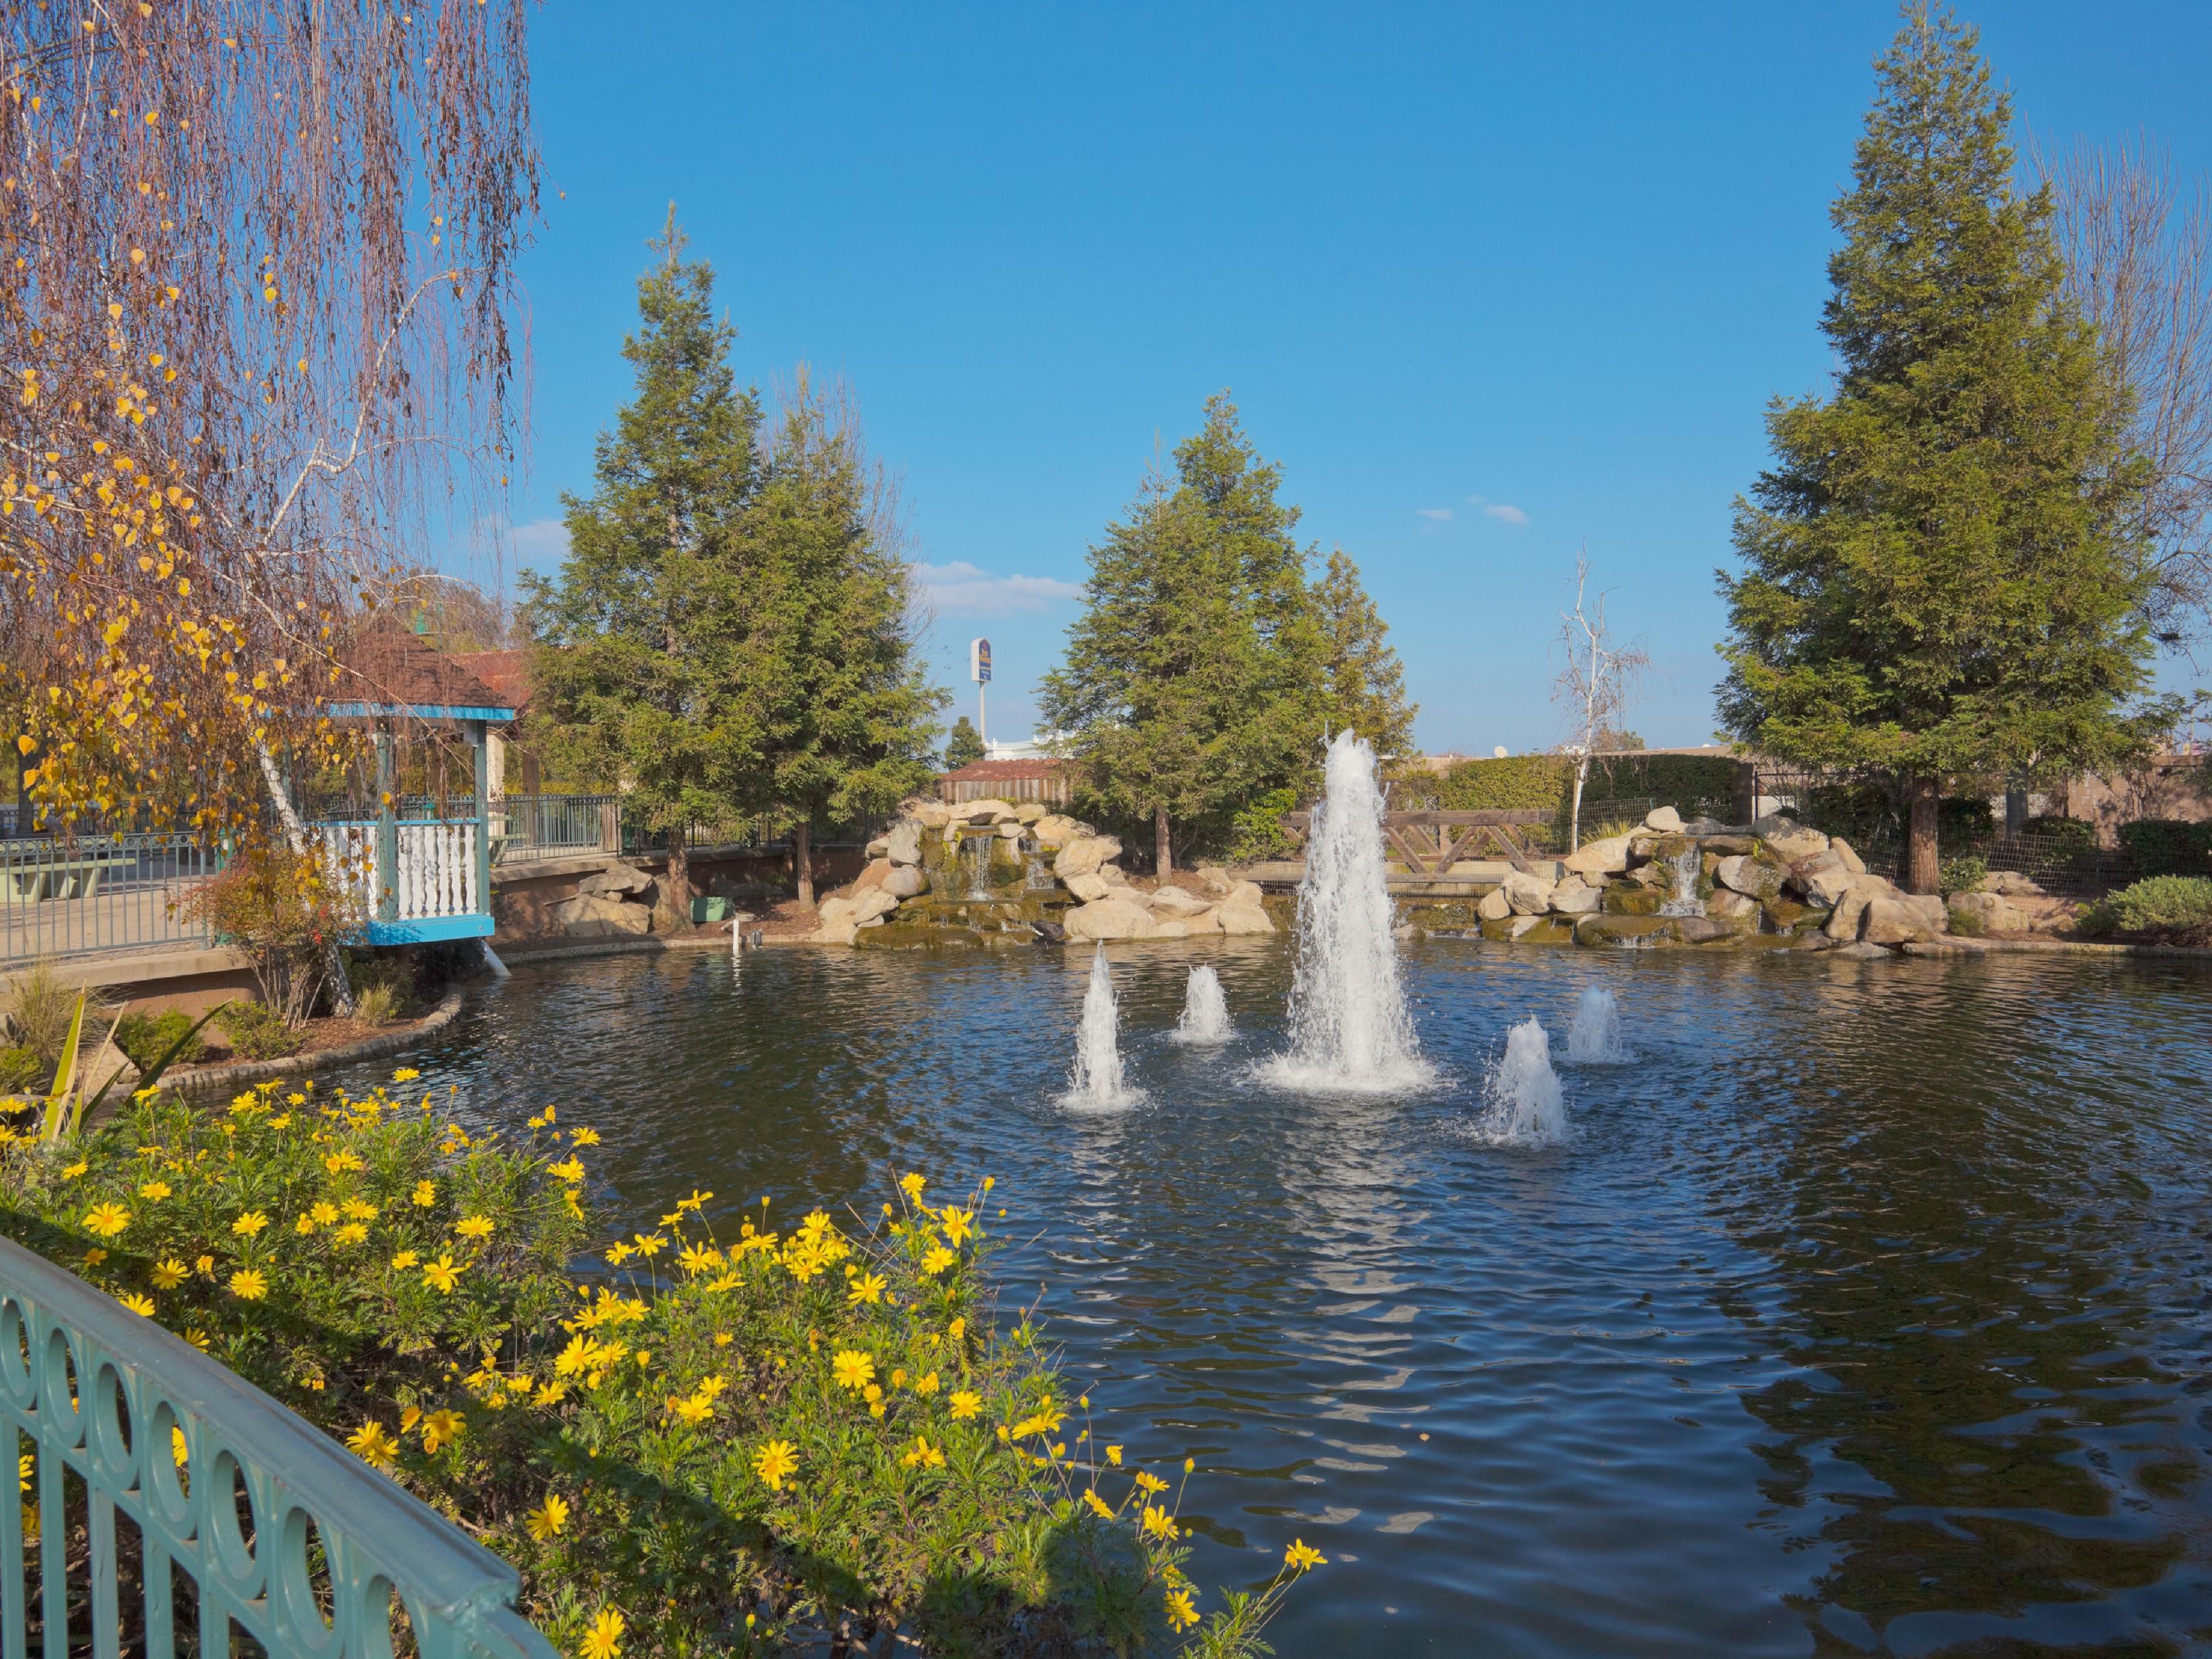 The hotel's facility in Selma, California offers more than convenience. Surrounded by trickling waterfalls and ponds that are home to beautiful Koi fish, the hotel is also a soothing natural oasis. Plan your stay with us!